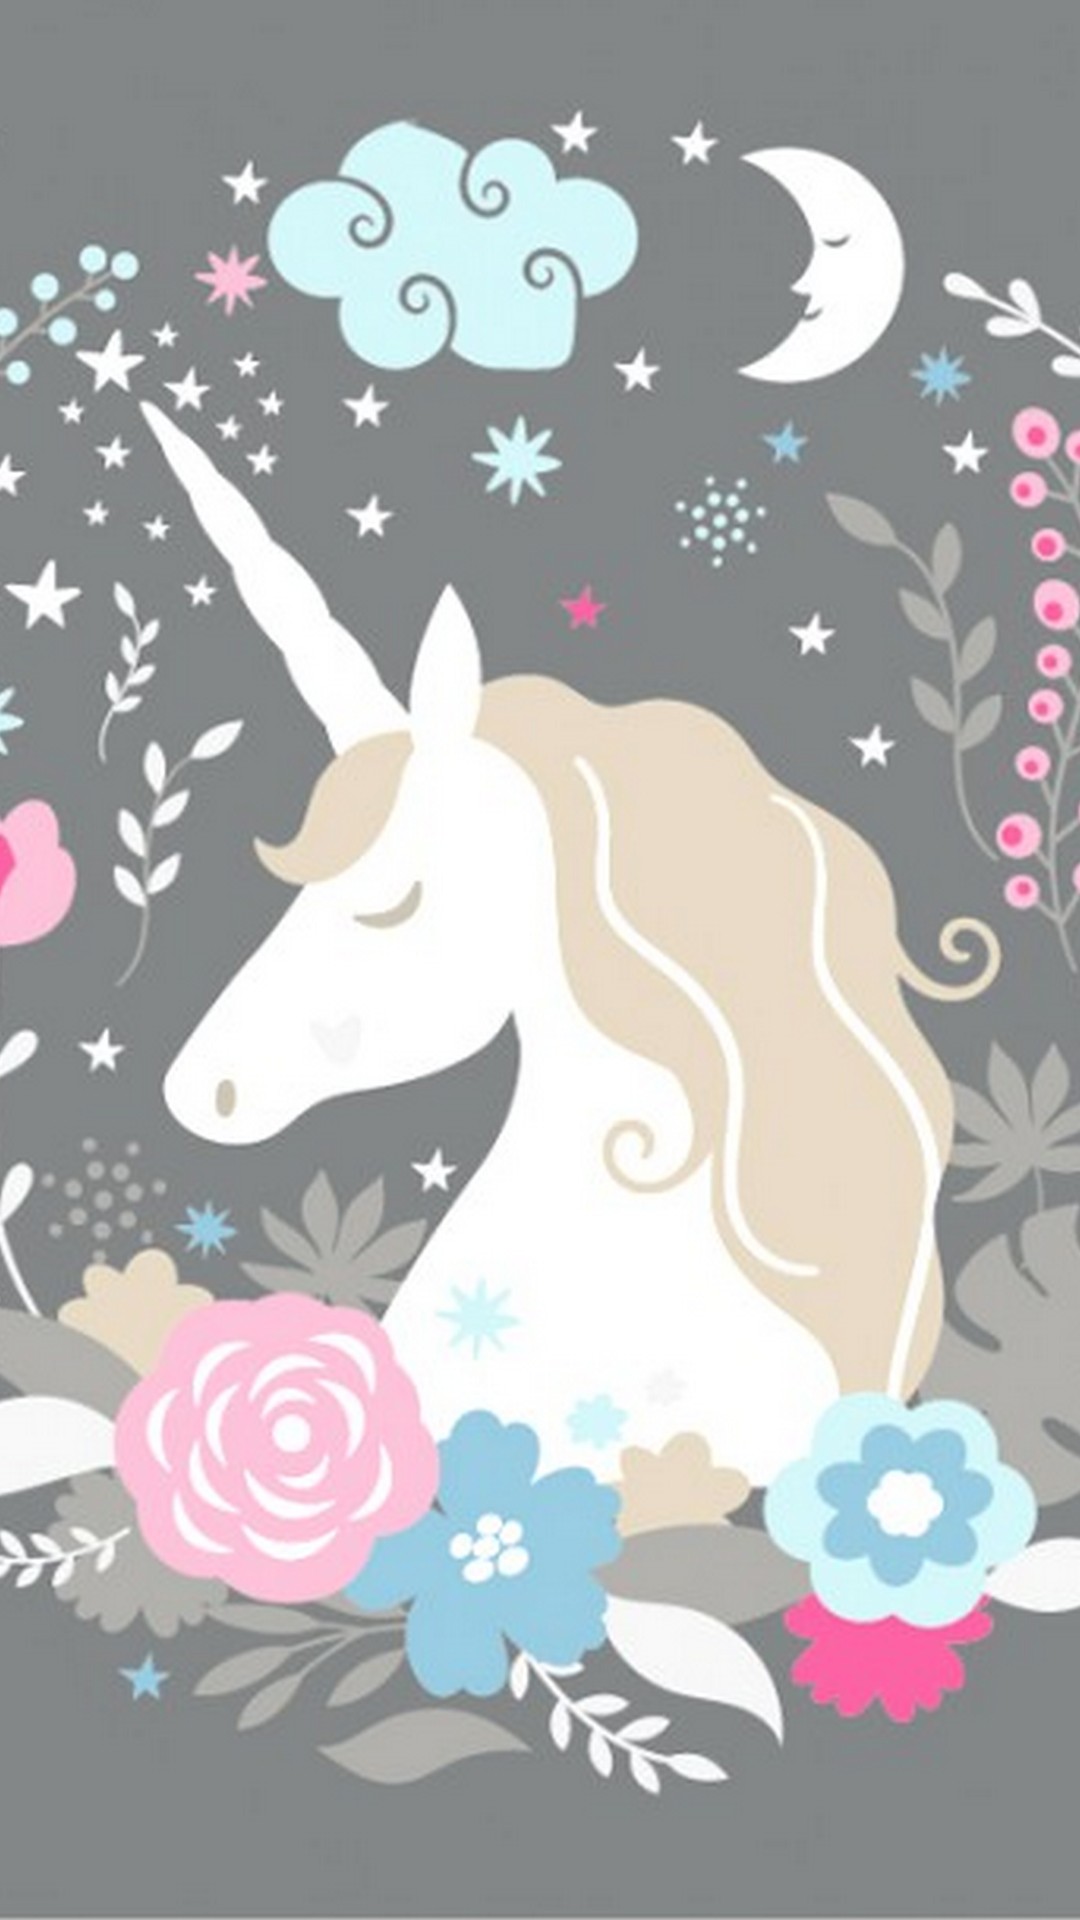 Cute Girly Unicorn iPhone 7 Wallpaper with high-resolution 1080x1920 pixel. You can use this wallpaper for your iPhone 5, 6, 7, 8, X, XS, XR backgrounds, Mobile Screensaver, or iPad Lock Screen